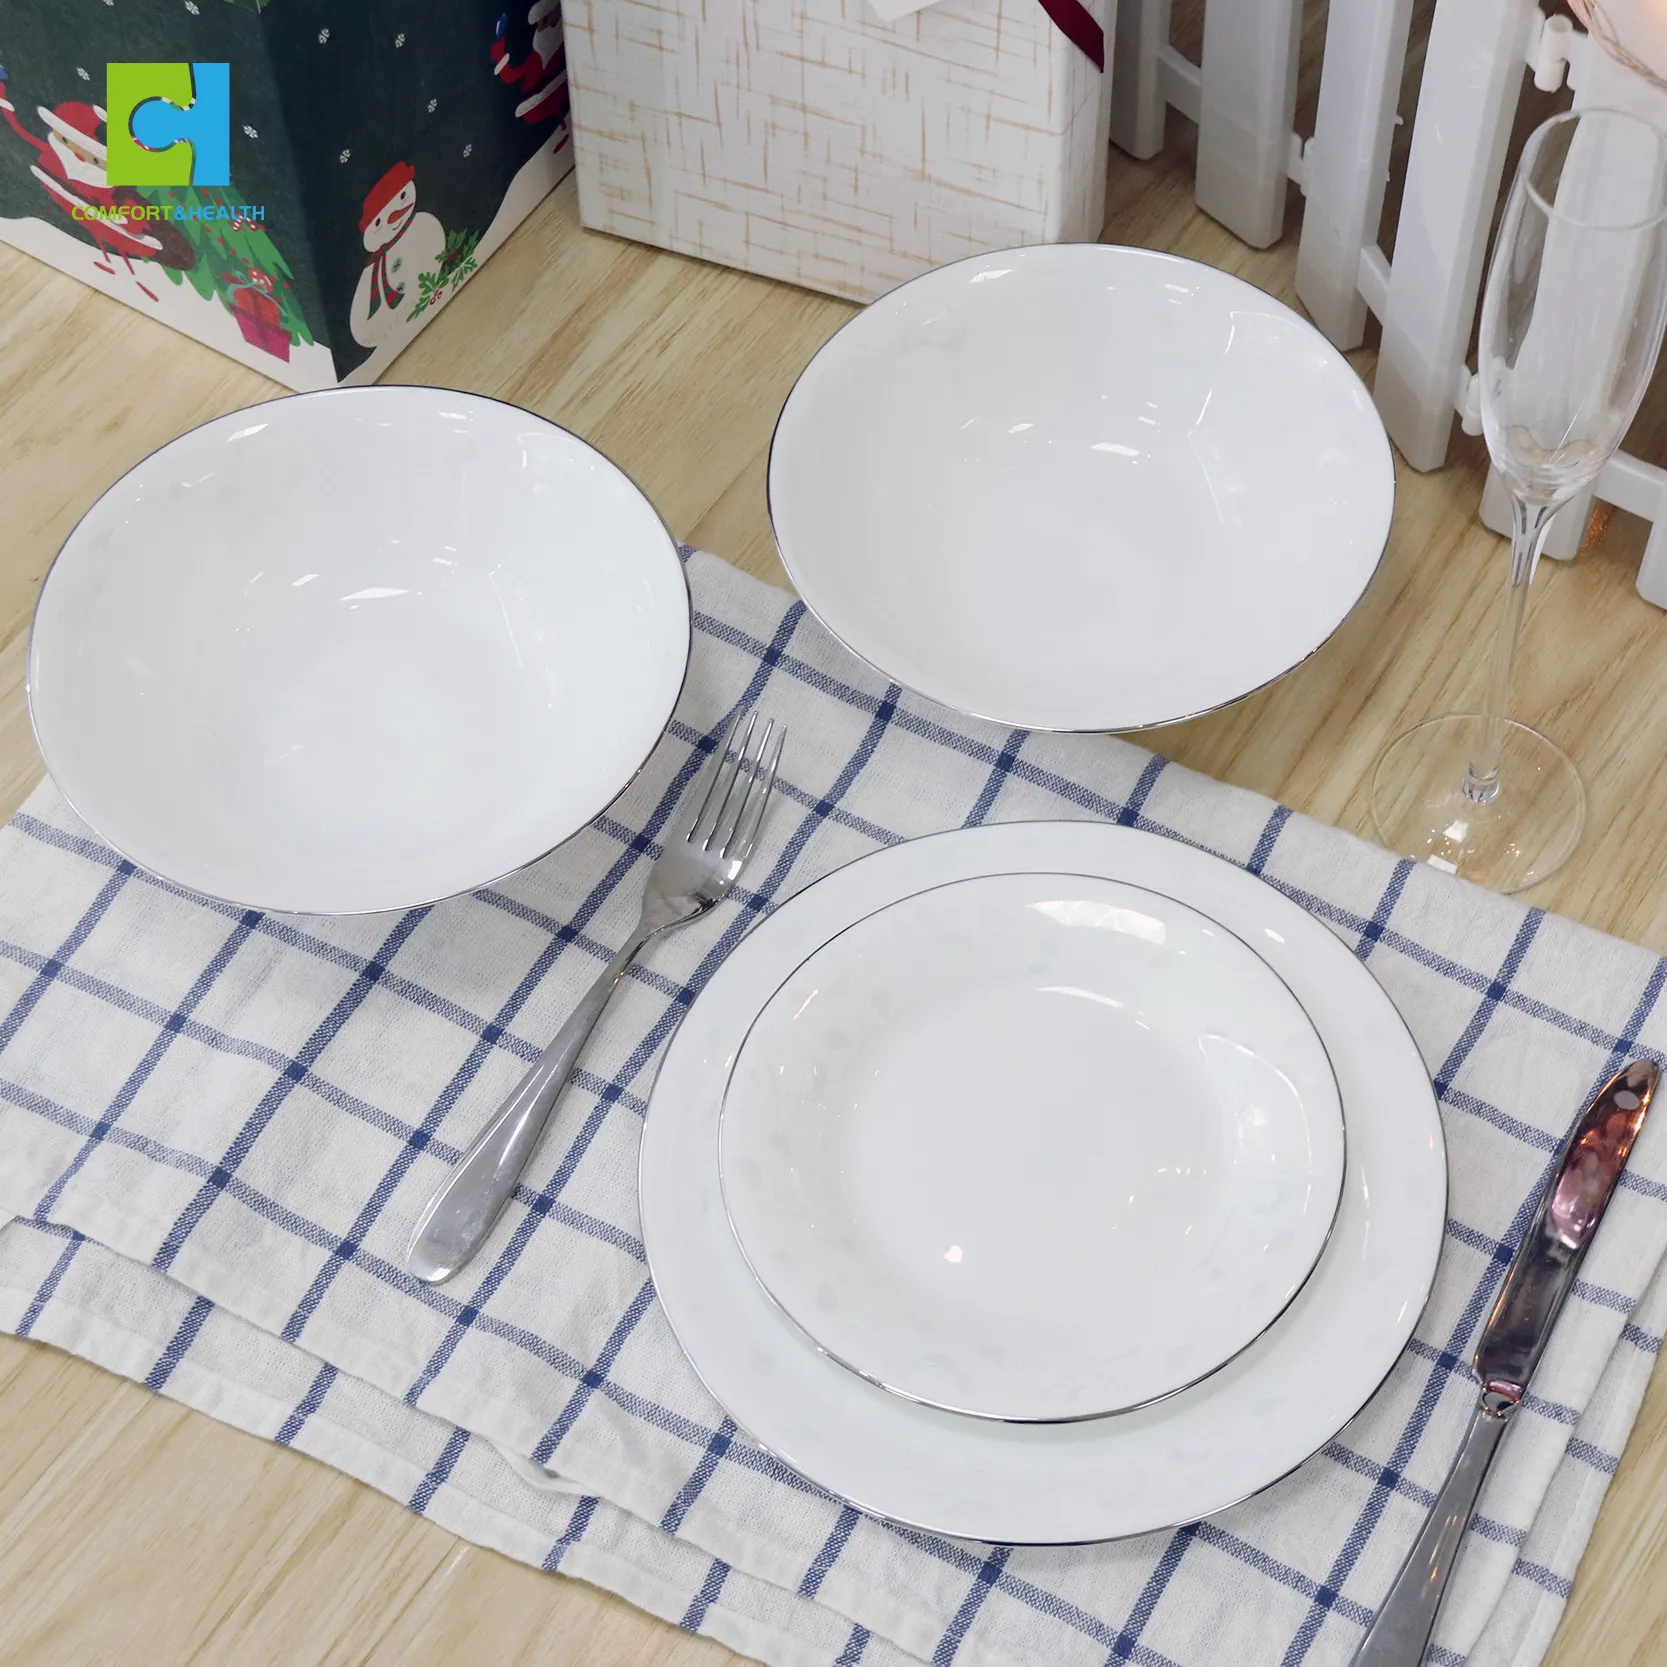 C&H Unique Artisan Design Premium Textured Superior Tempered Opal Glass Dinner Plates For Stunning Table